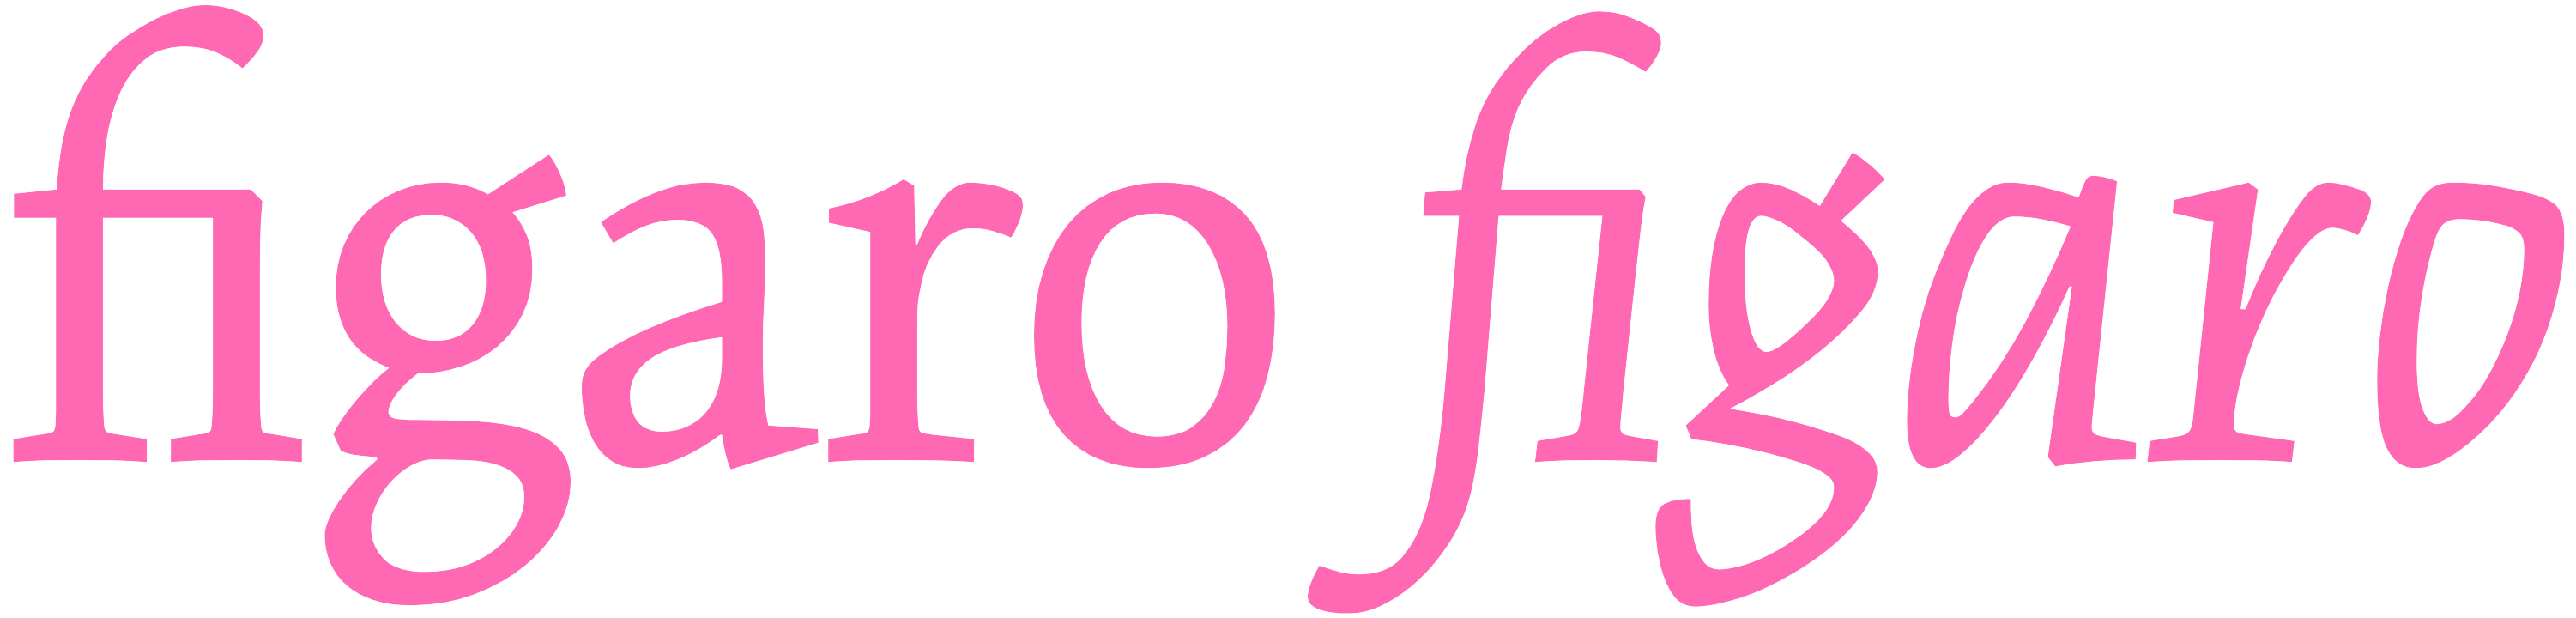 The word 'figaro' in regular and italic style, so you can spot the differences